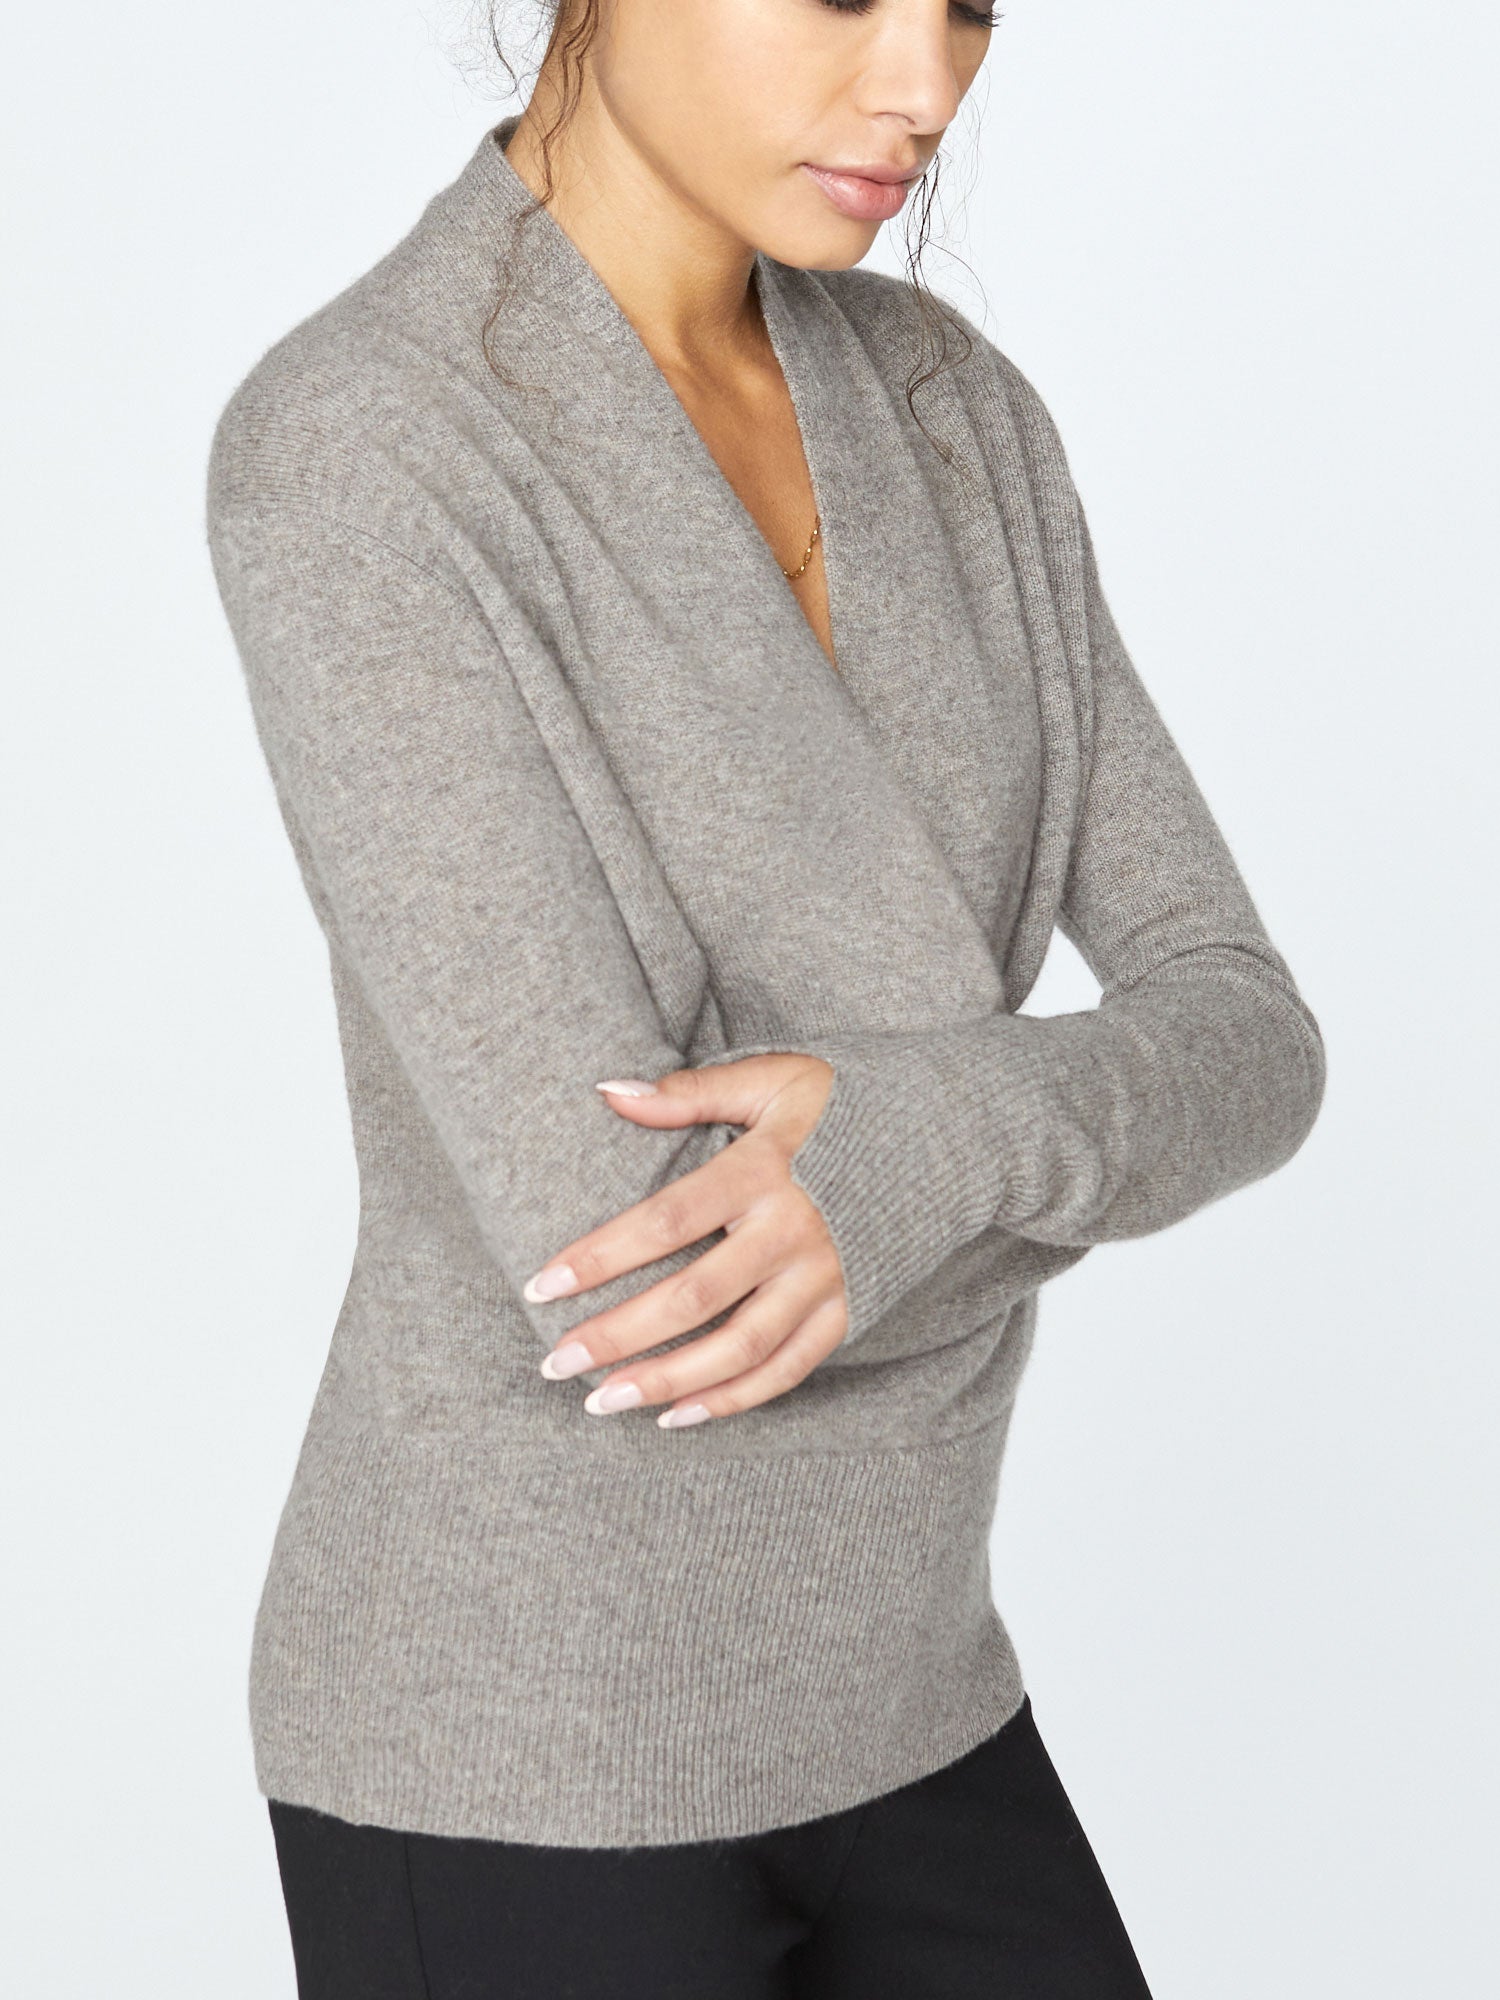 Phinneas cashmere v-neck blue grey sweater side view